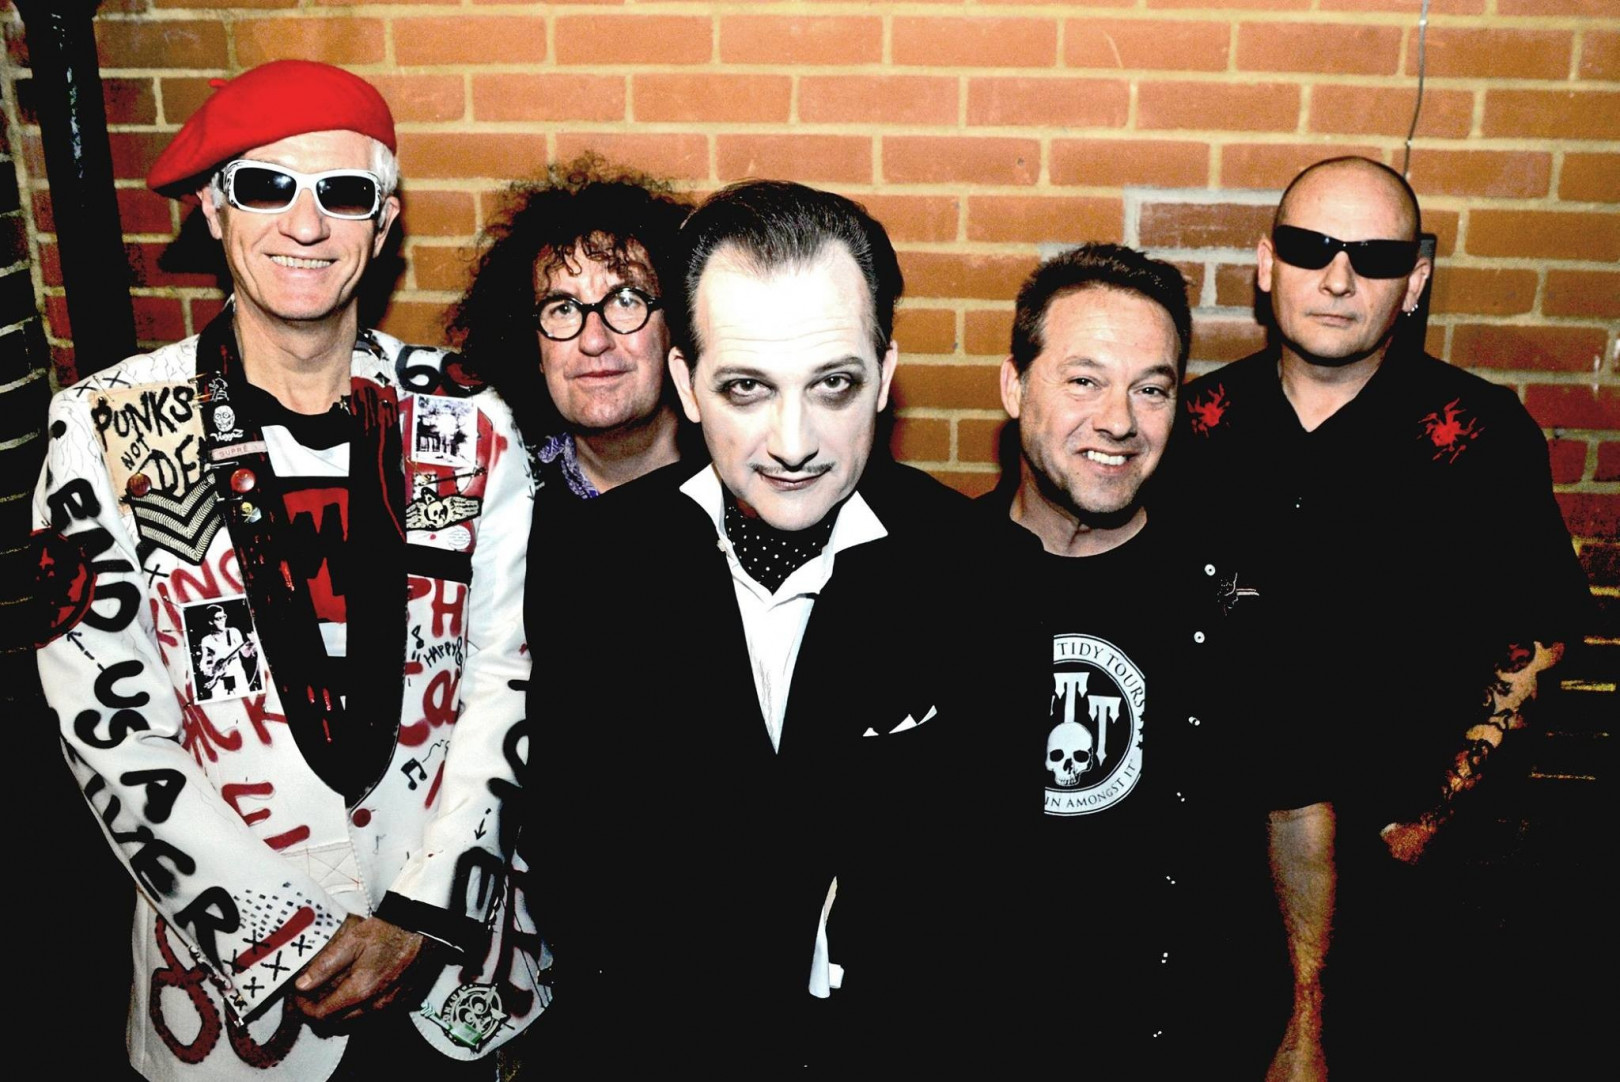 The Damned: "Invisible Man"